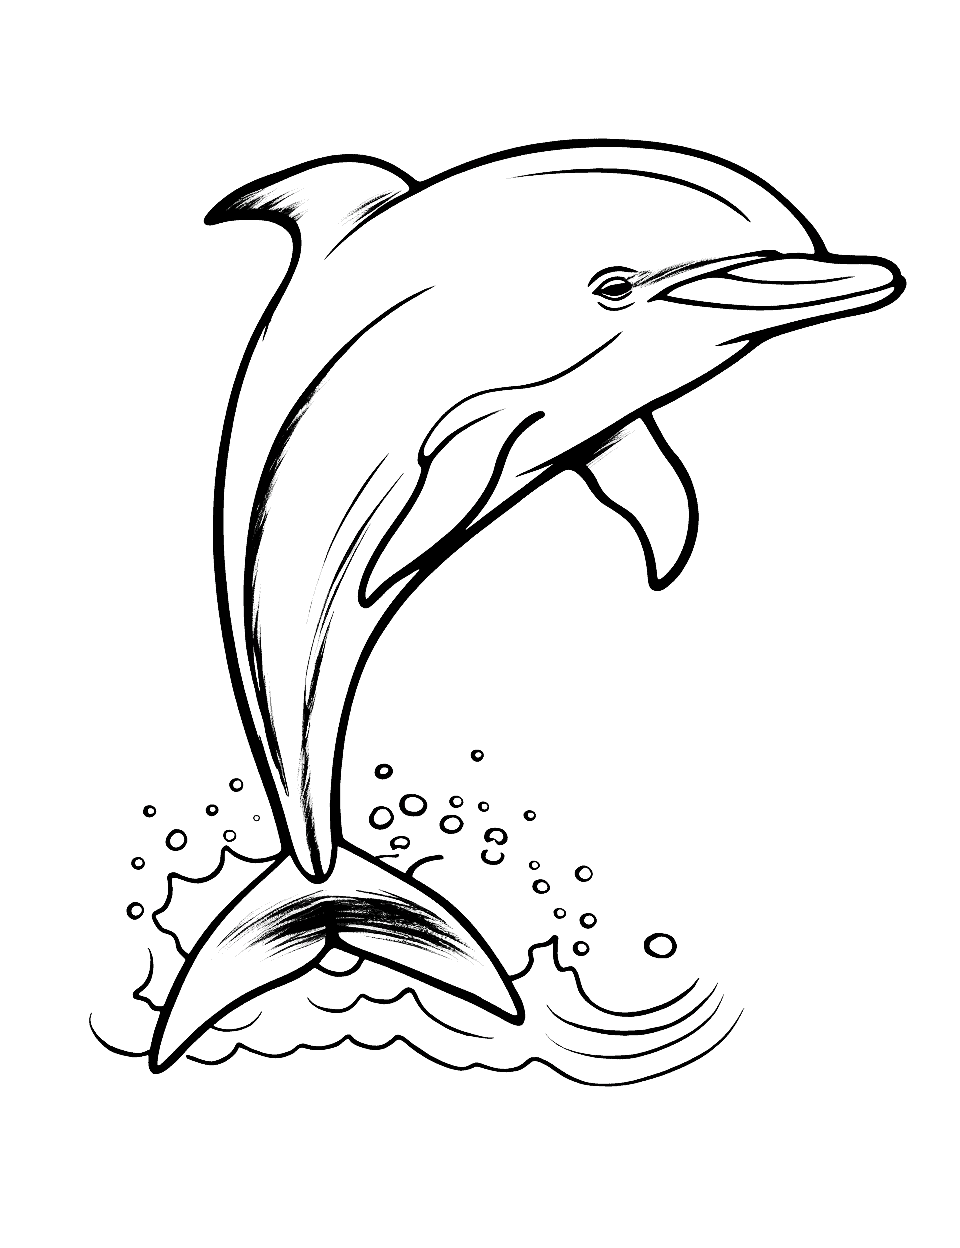 Realistic Dolphin Swimming Cute Coloring Page - A realistic depiction of a cute dolphin gracefully swimming in the ocean.